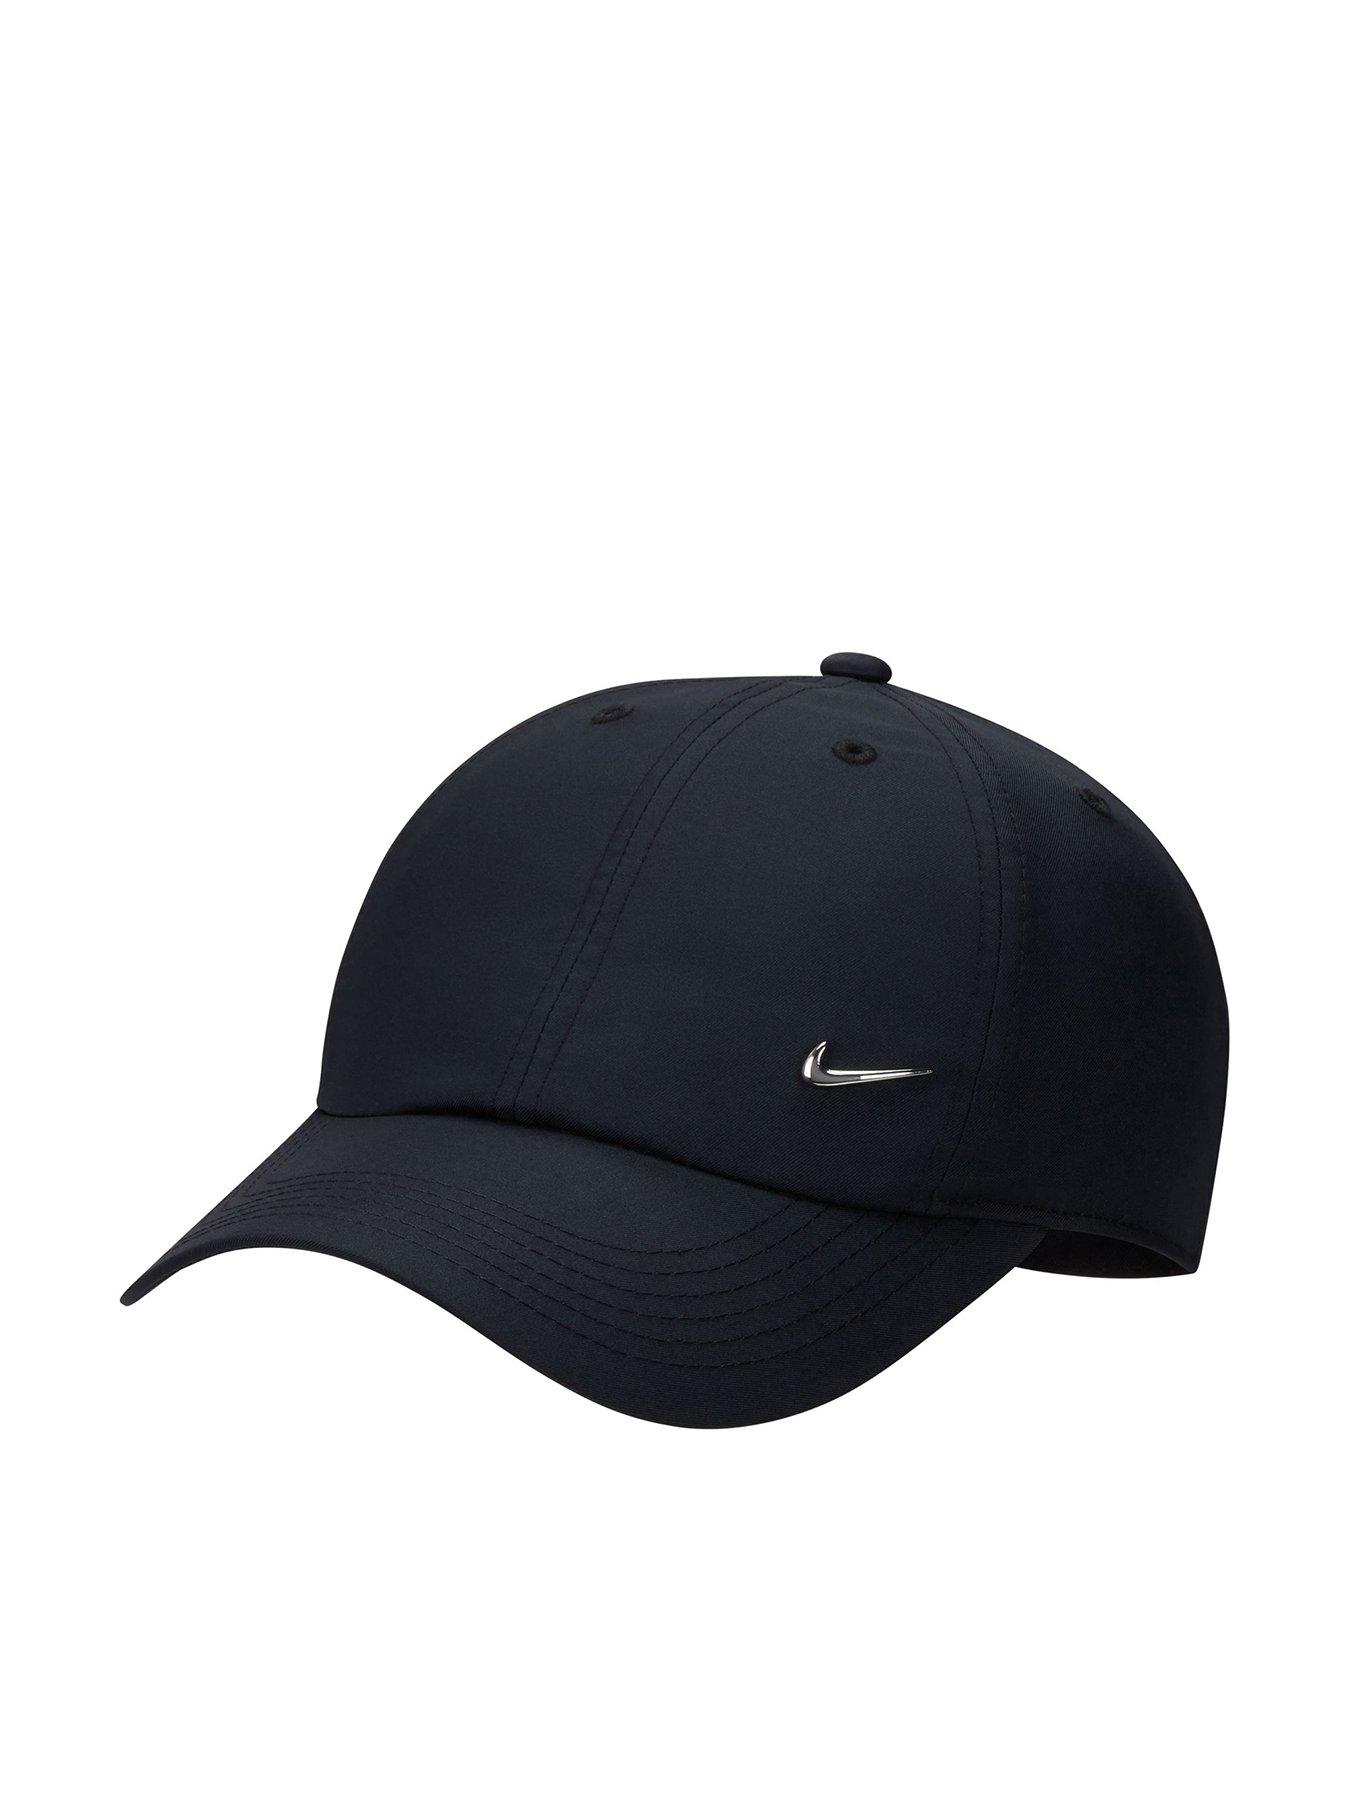 Nike Metal Swoosh Cap, Men's Fashion, Watches & Accessories, Cap & Hats on  Carousell